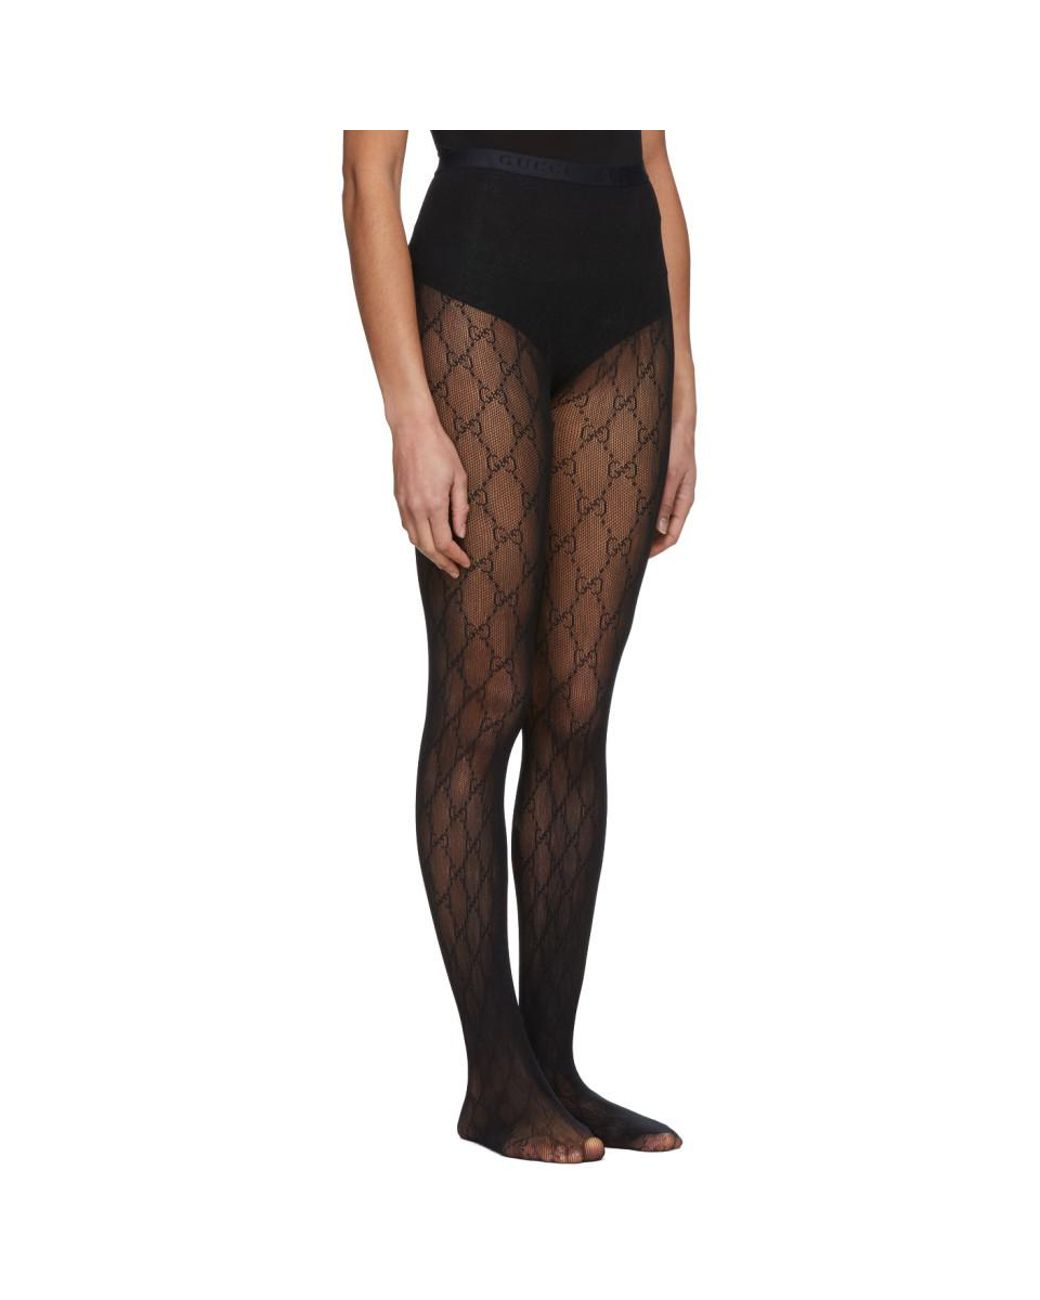 GUCCI Black GG Supreme Tights  Stockings outfit, Black stockings outfit,  Gg tights outfit